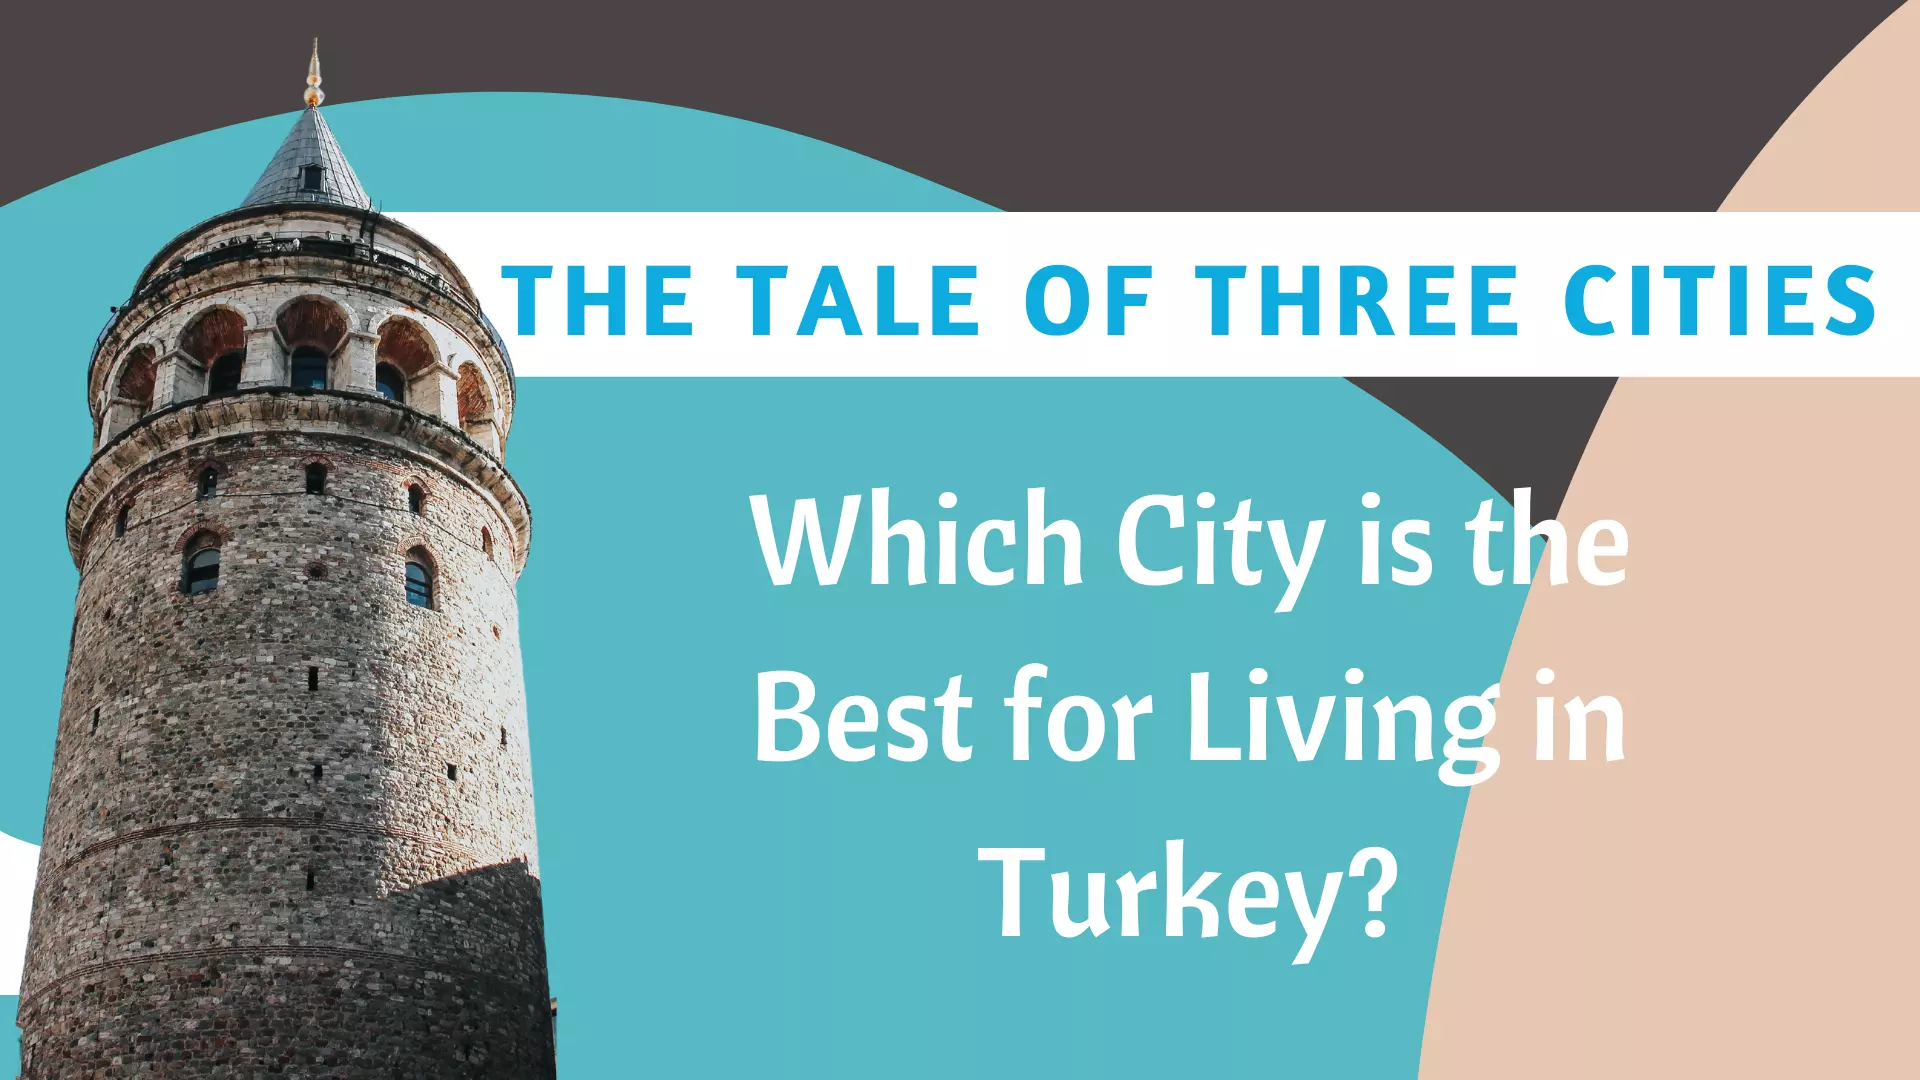 Which City is the Best for Living in Turkey? The Tale of Three Cities